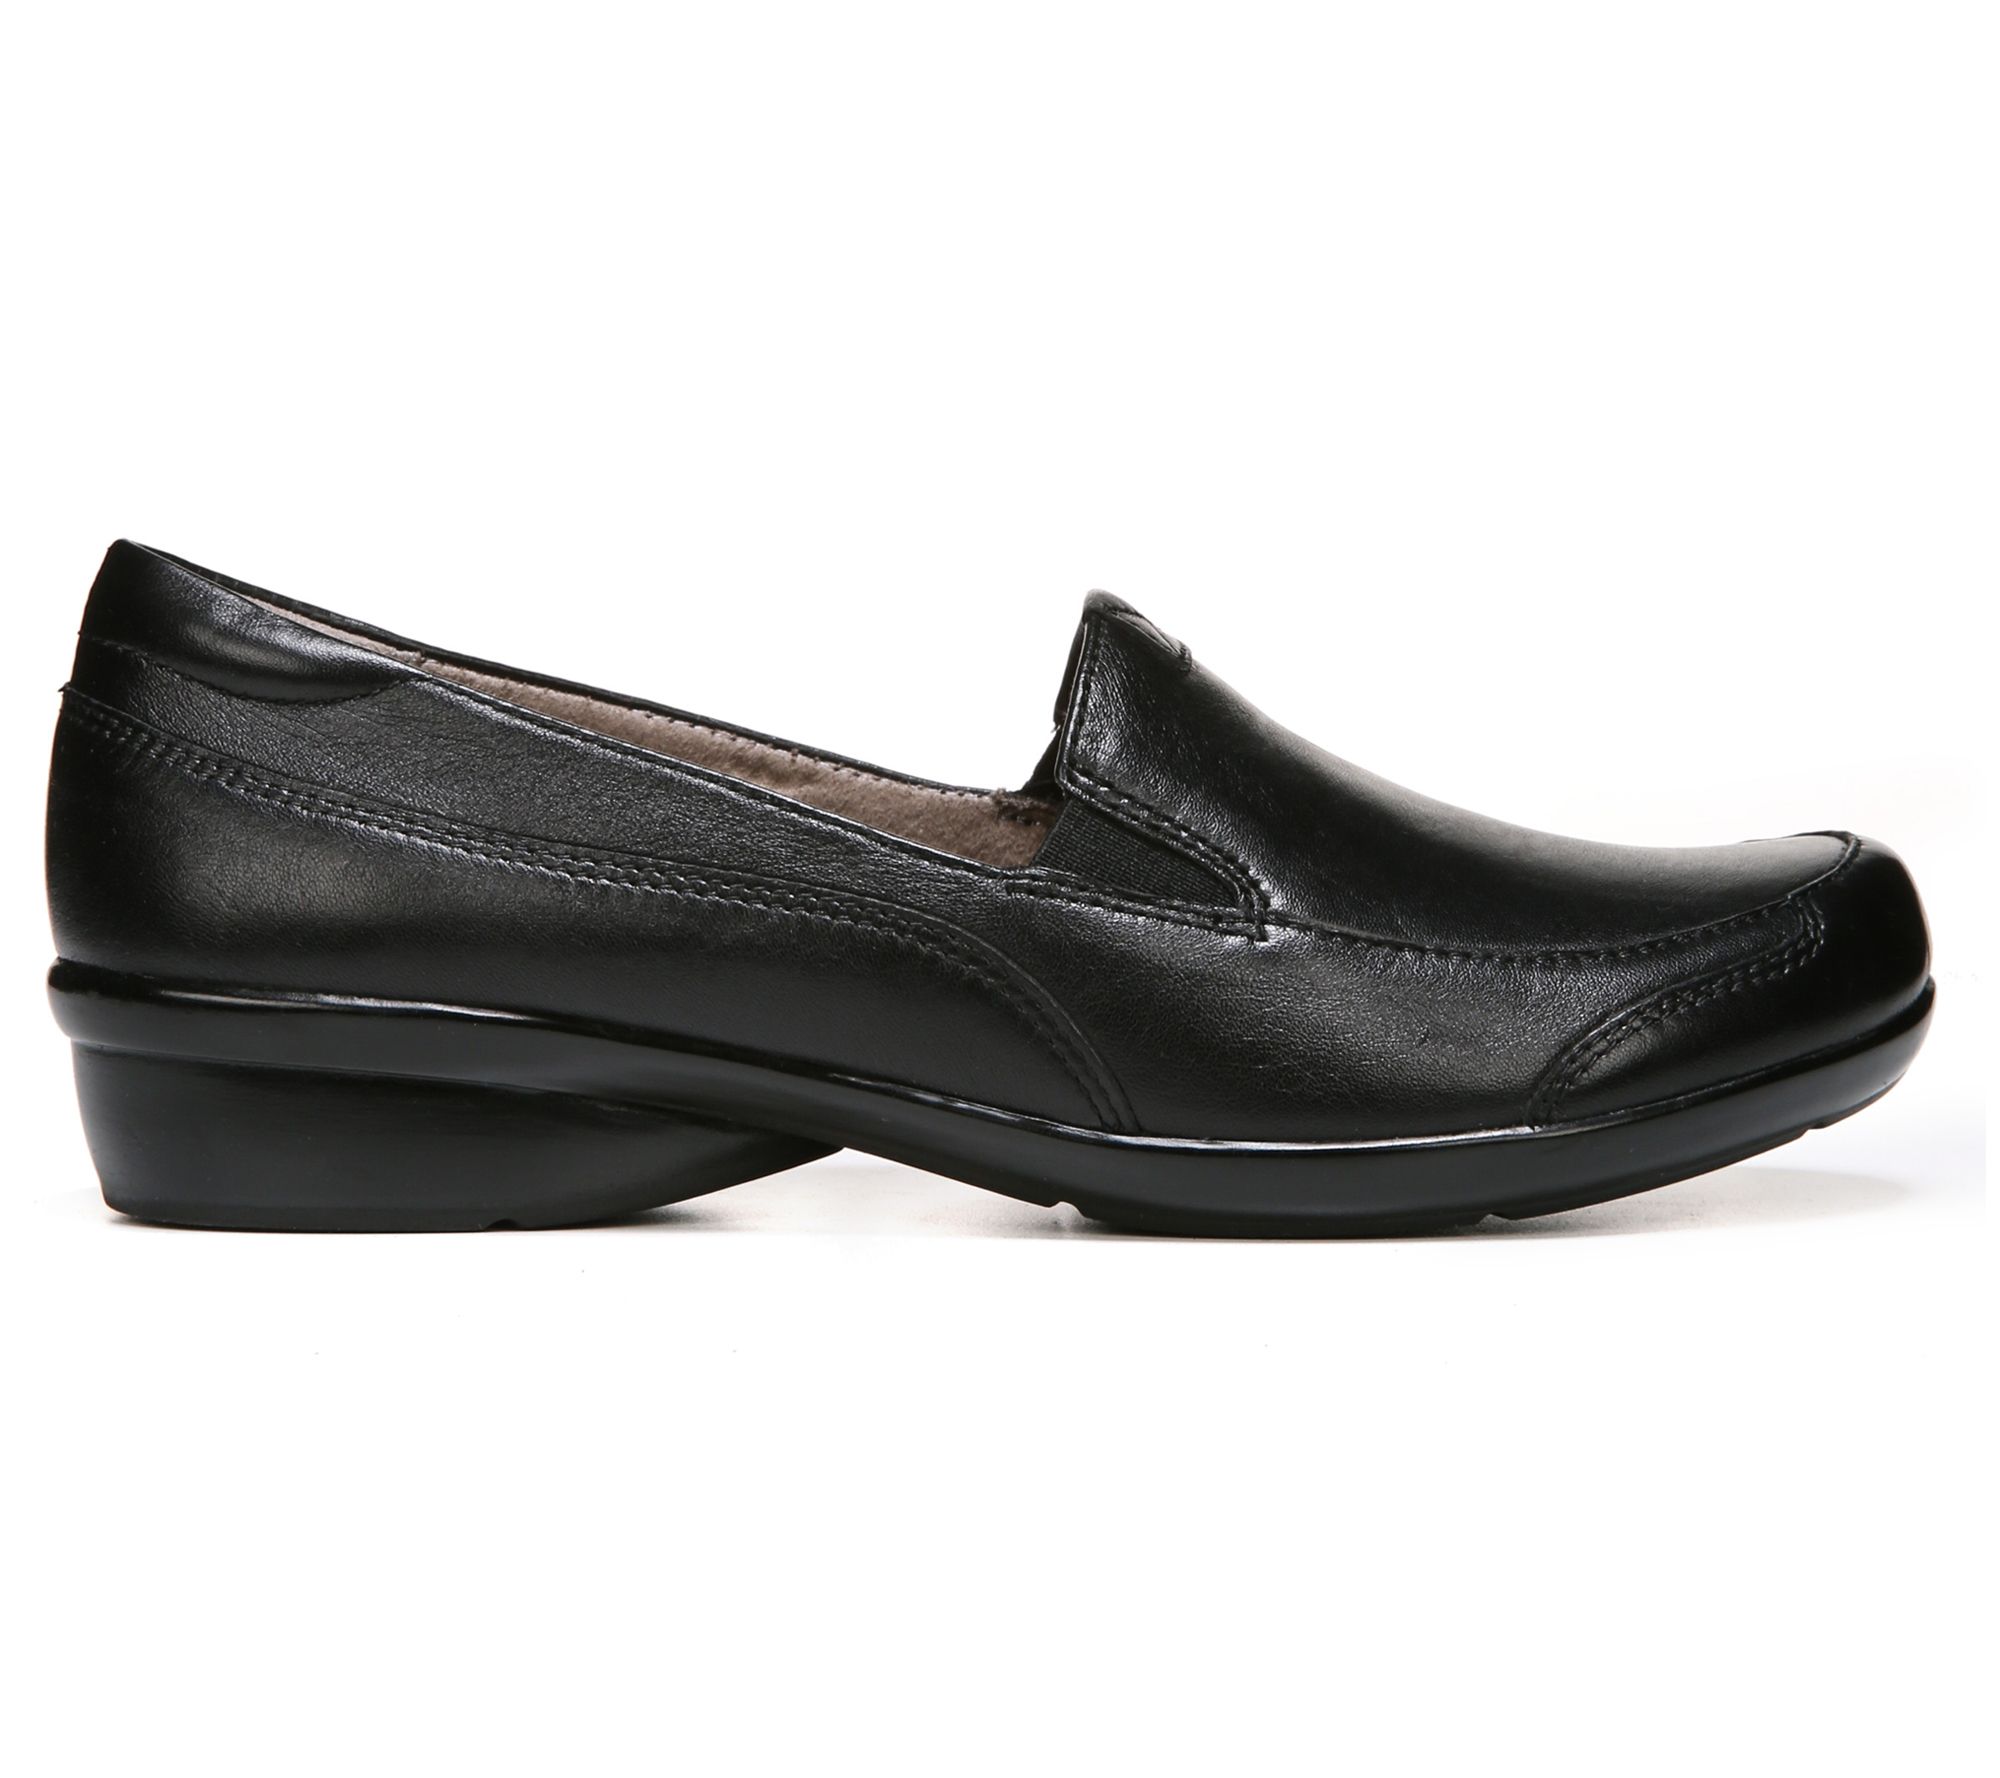 Naturalizer Slip-On Leather Loafers - Channing - QVC.com